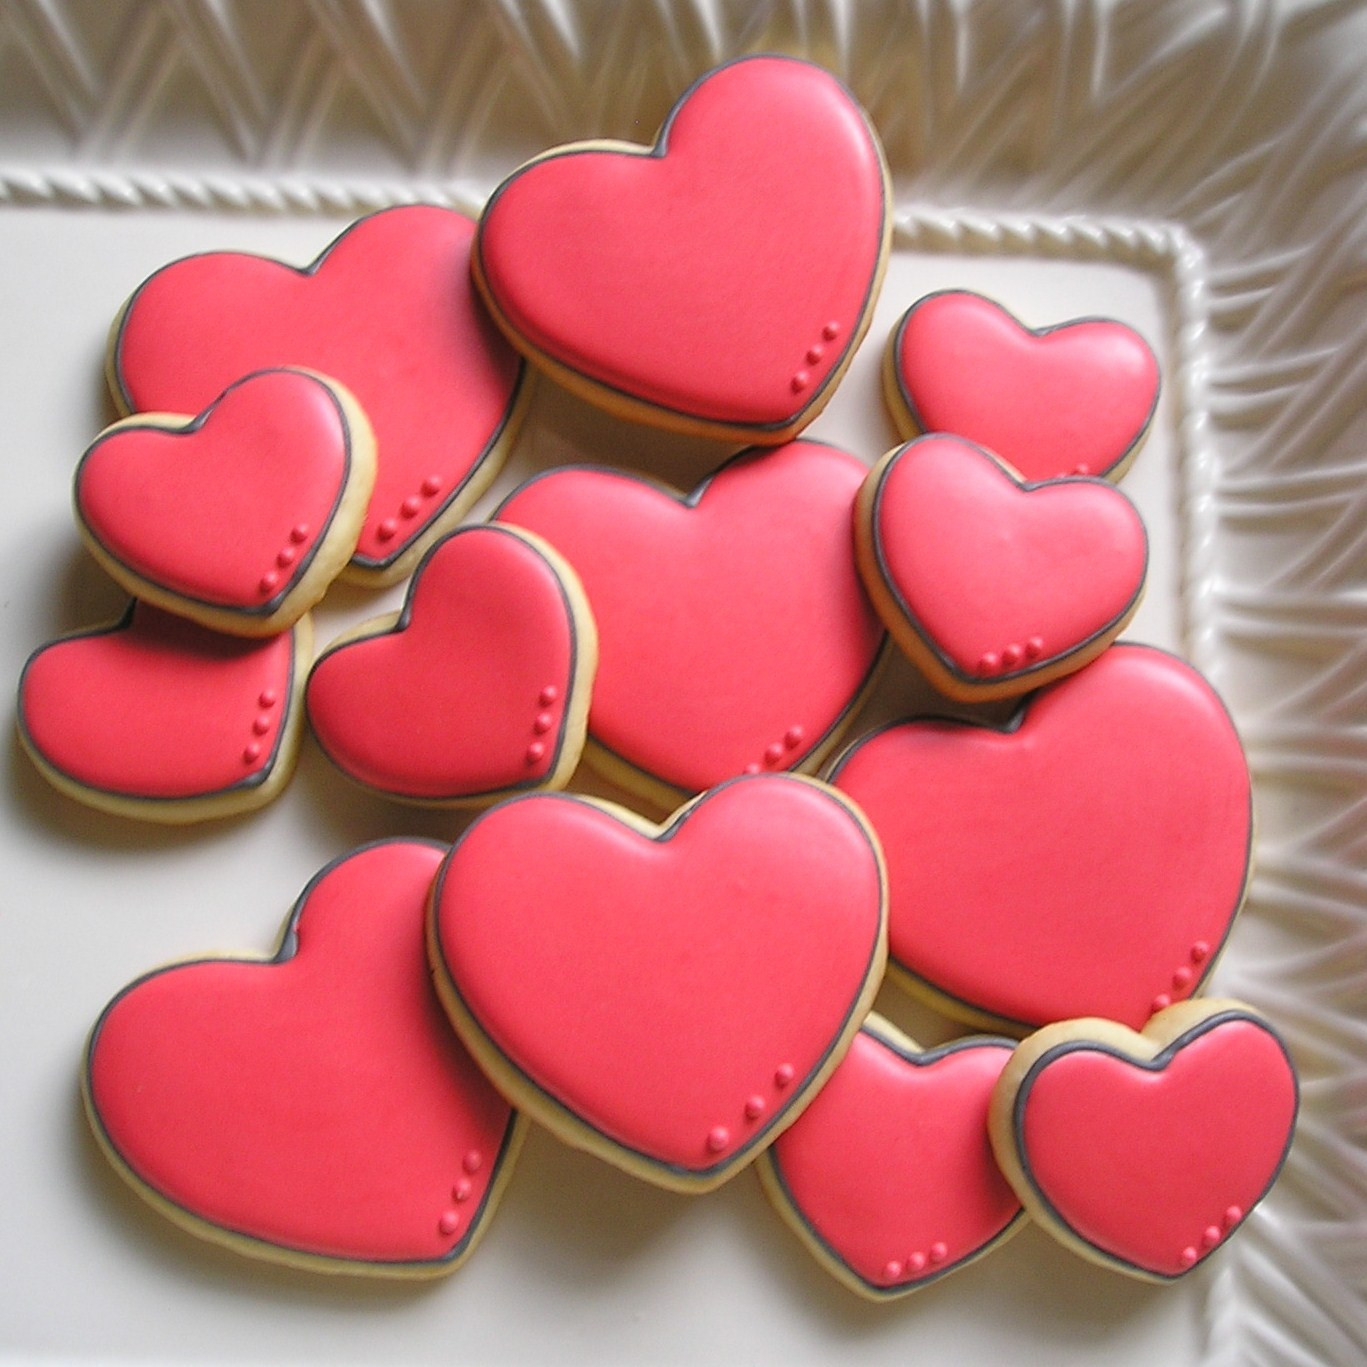 Valentine Sugar Cookies Decorating Ideas
 So what would I have done differently